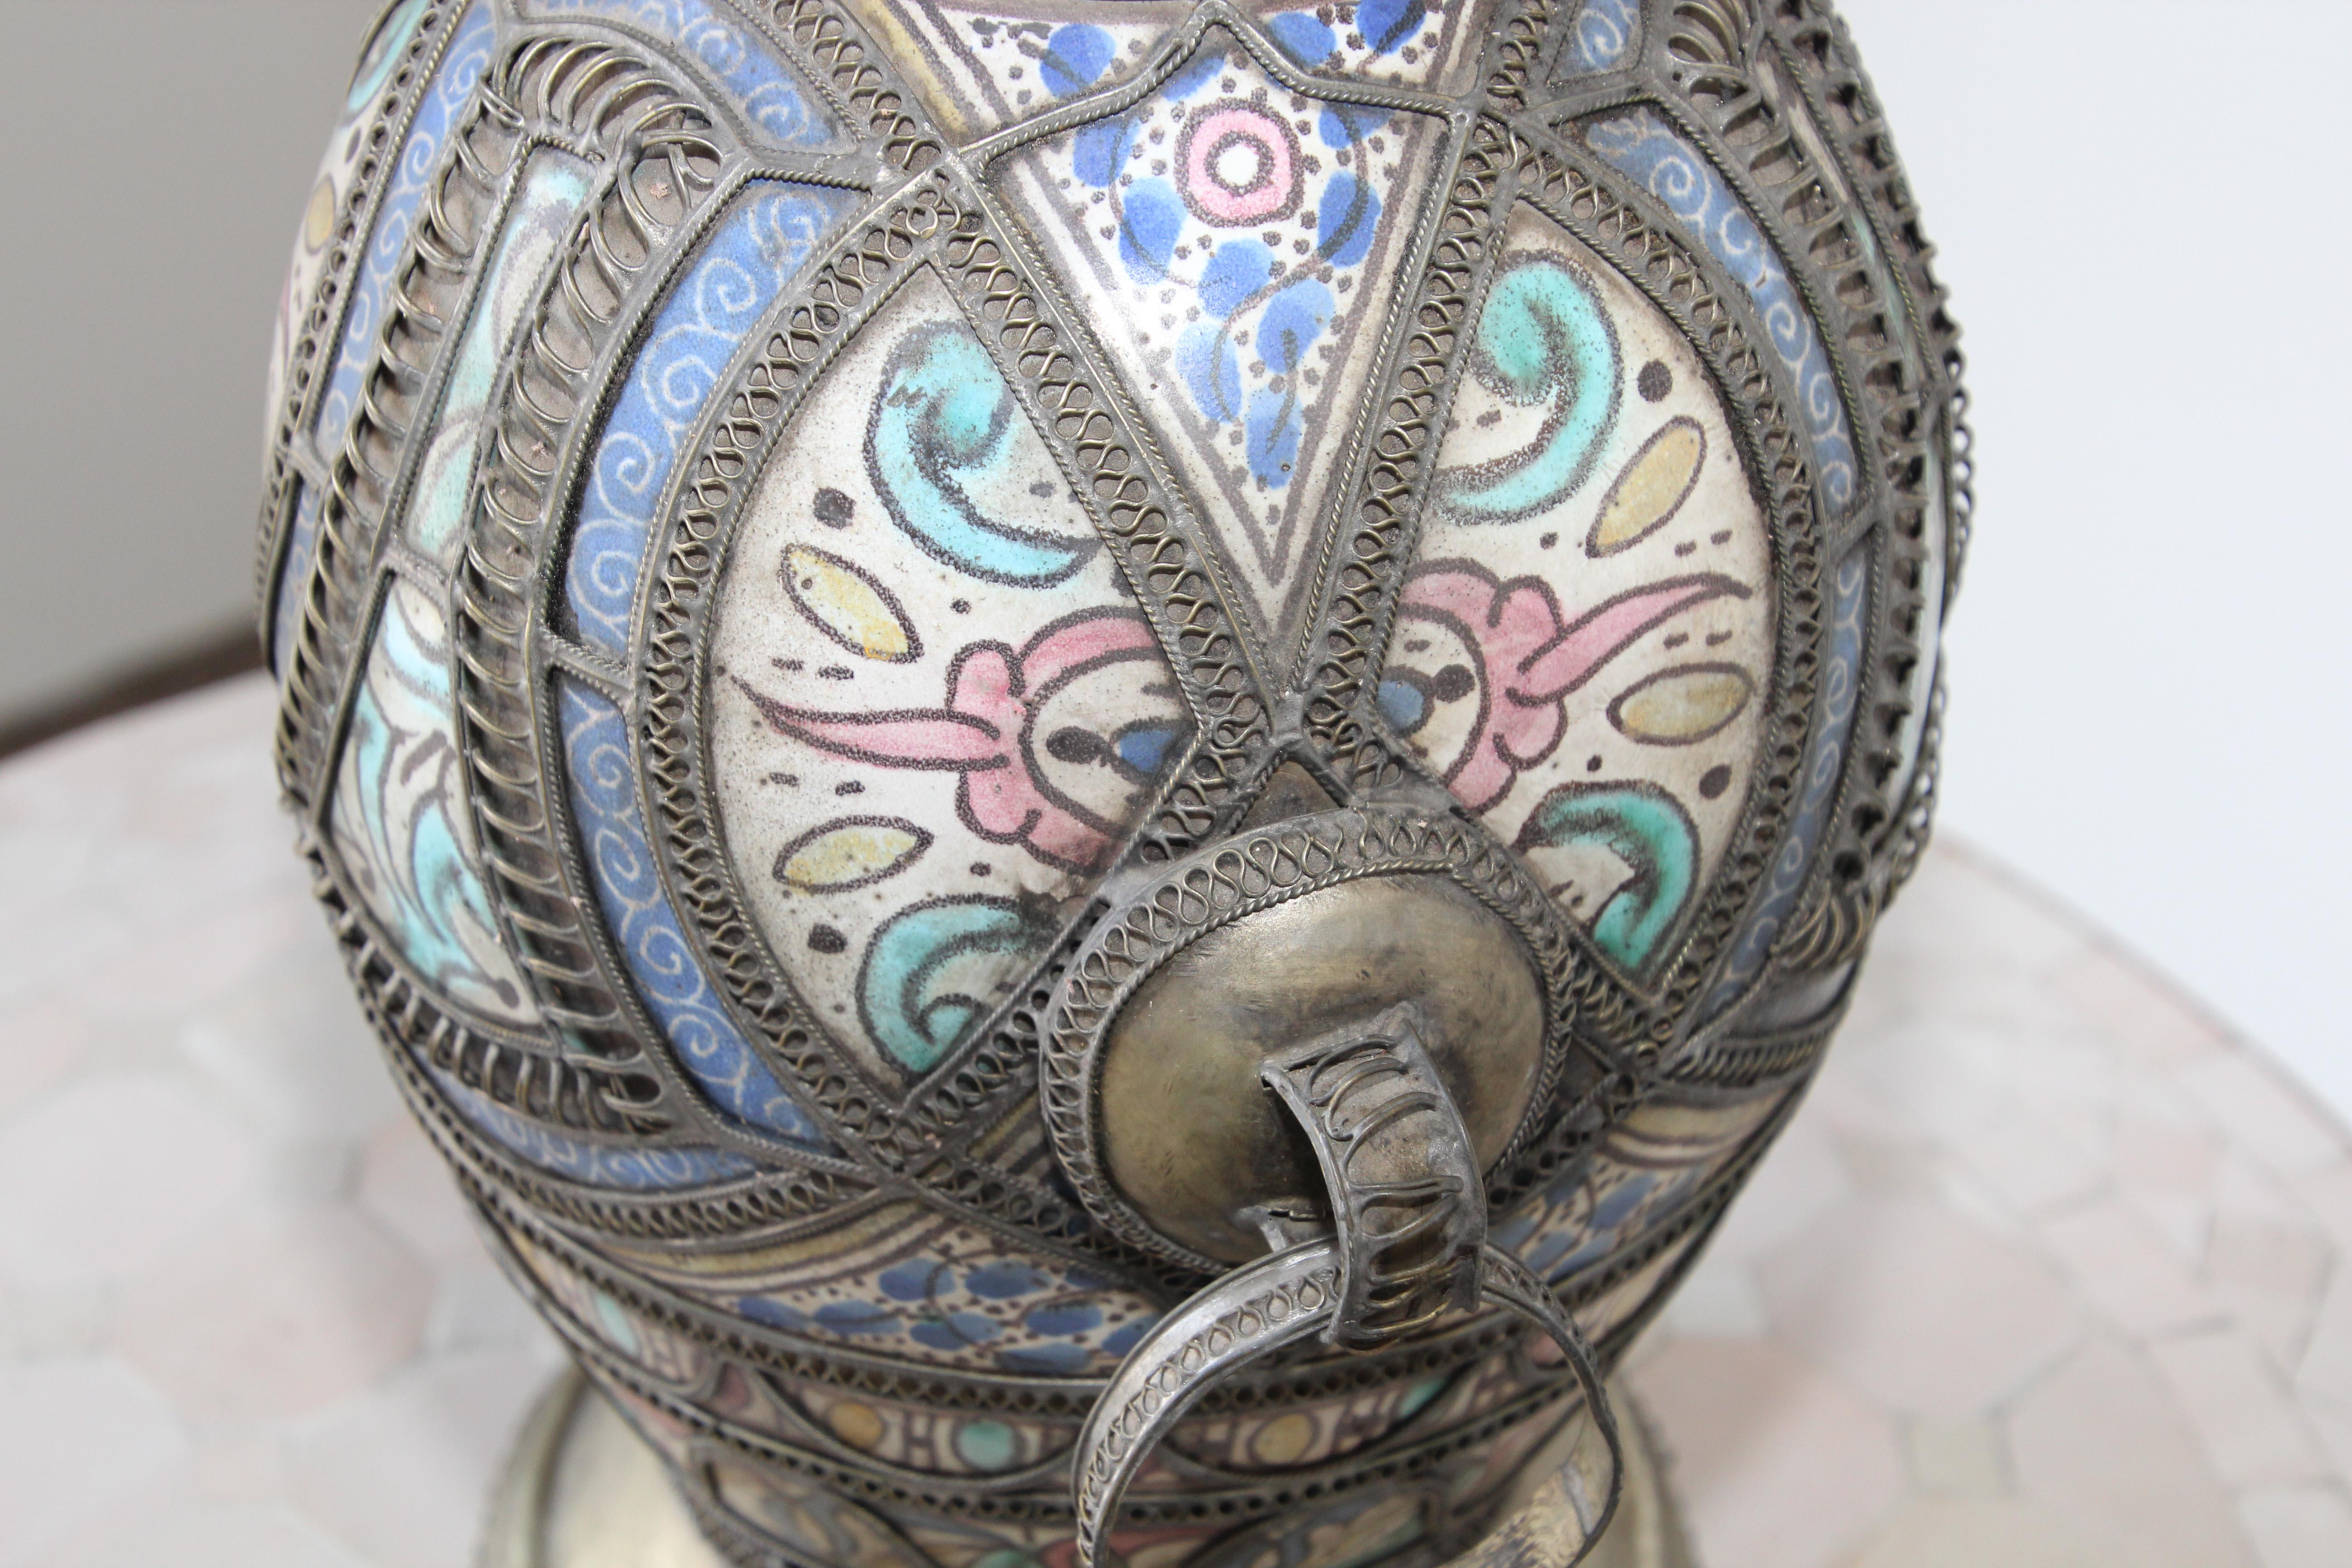 Antique Moroccan Ceramic Footed Vase from Fez with Silver Filigree For Sale 4